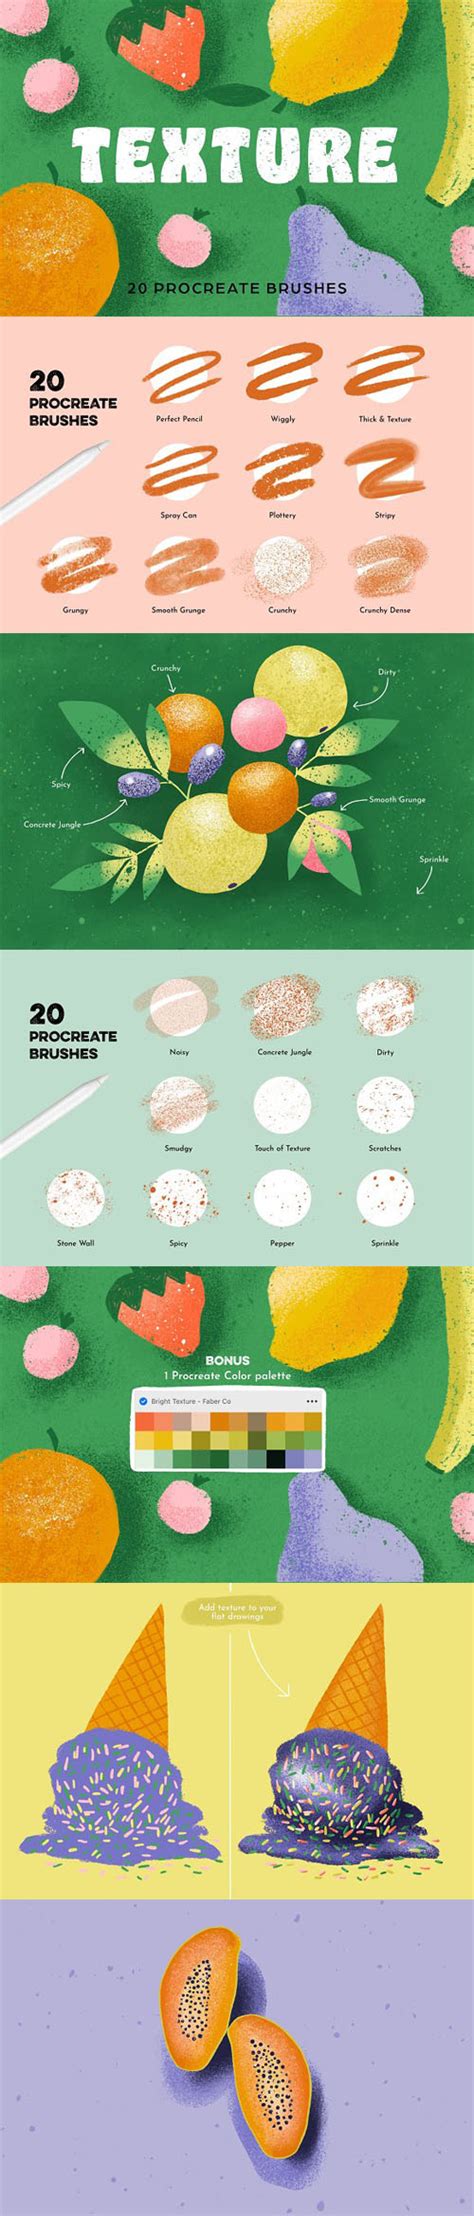 20 Texture Brushes for Procreate | Brushes for Photoshop